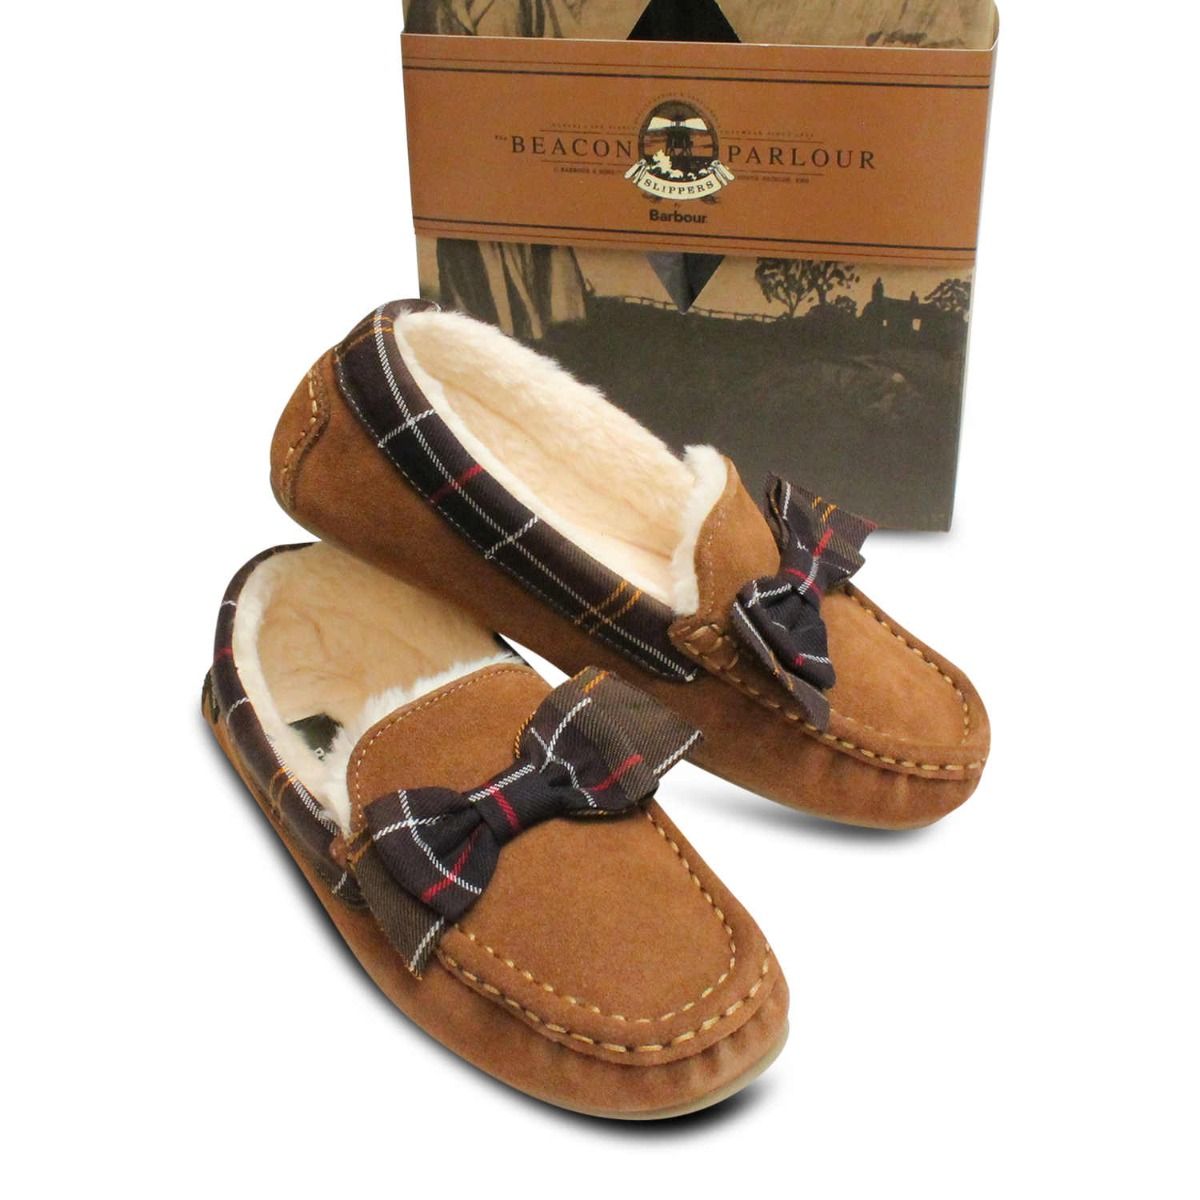 barbour womens slippers